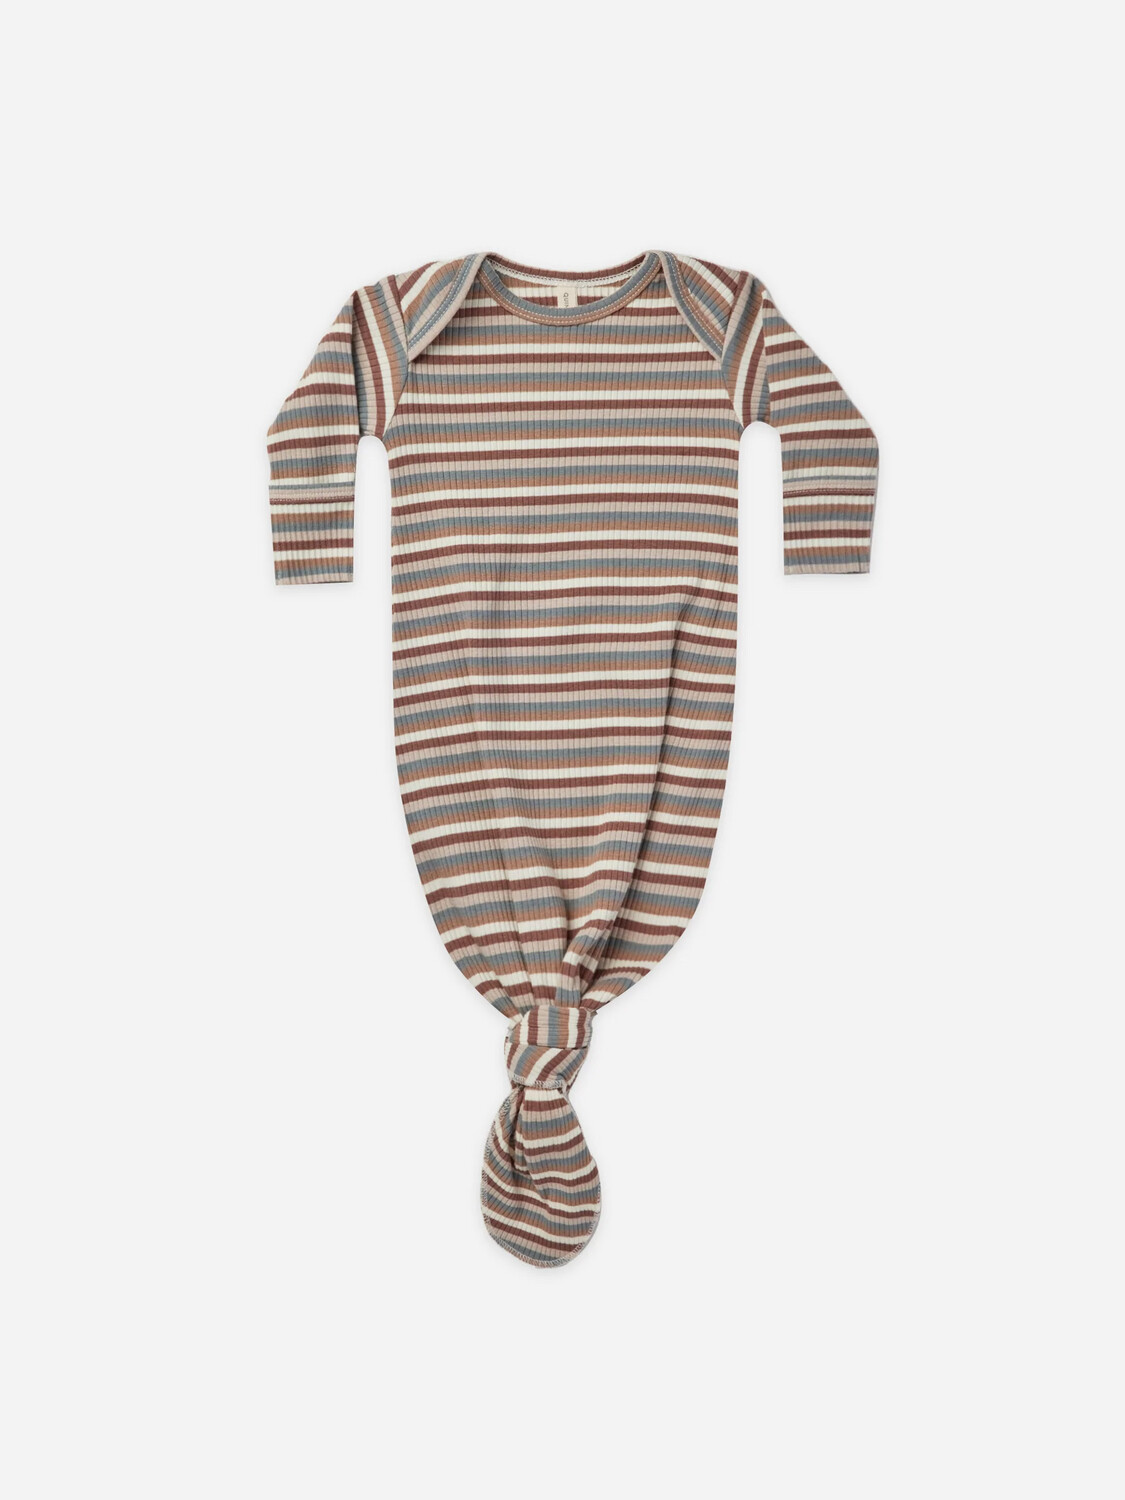 Knotted Baby Gown Autumn Stripe